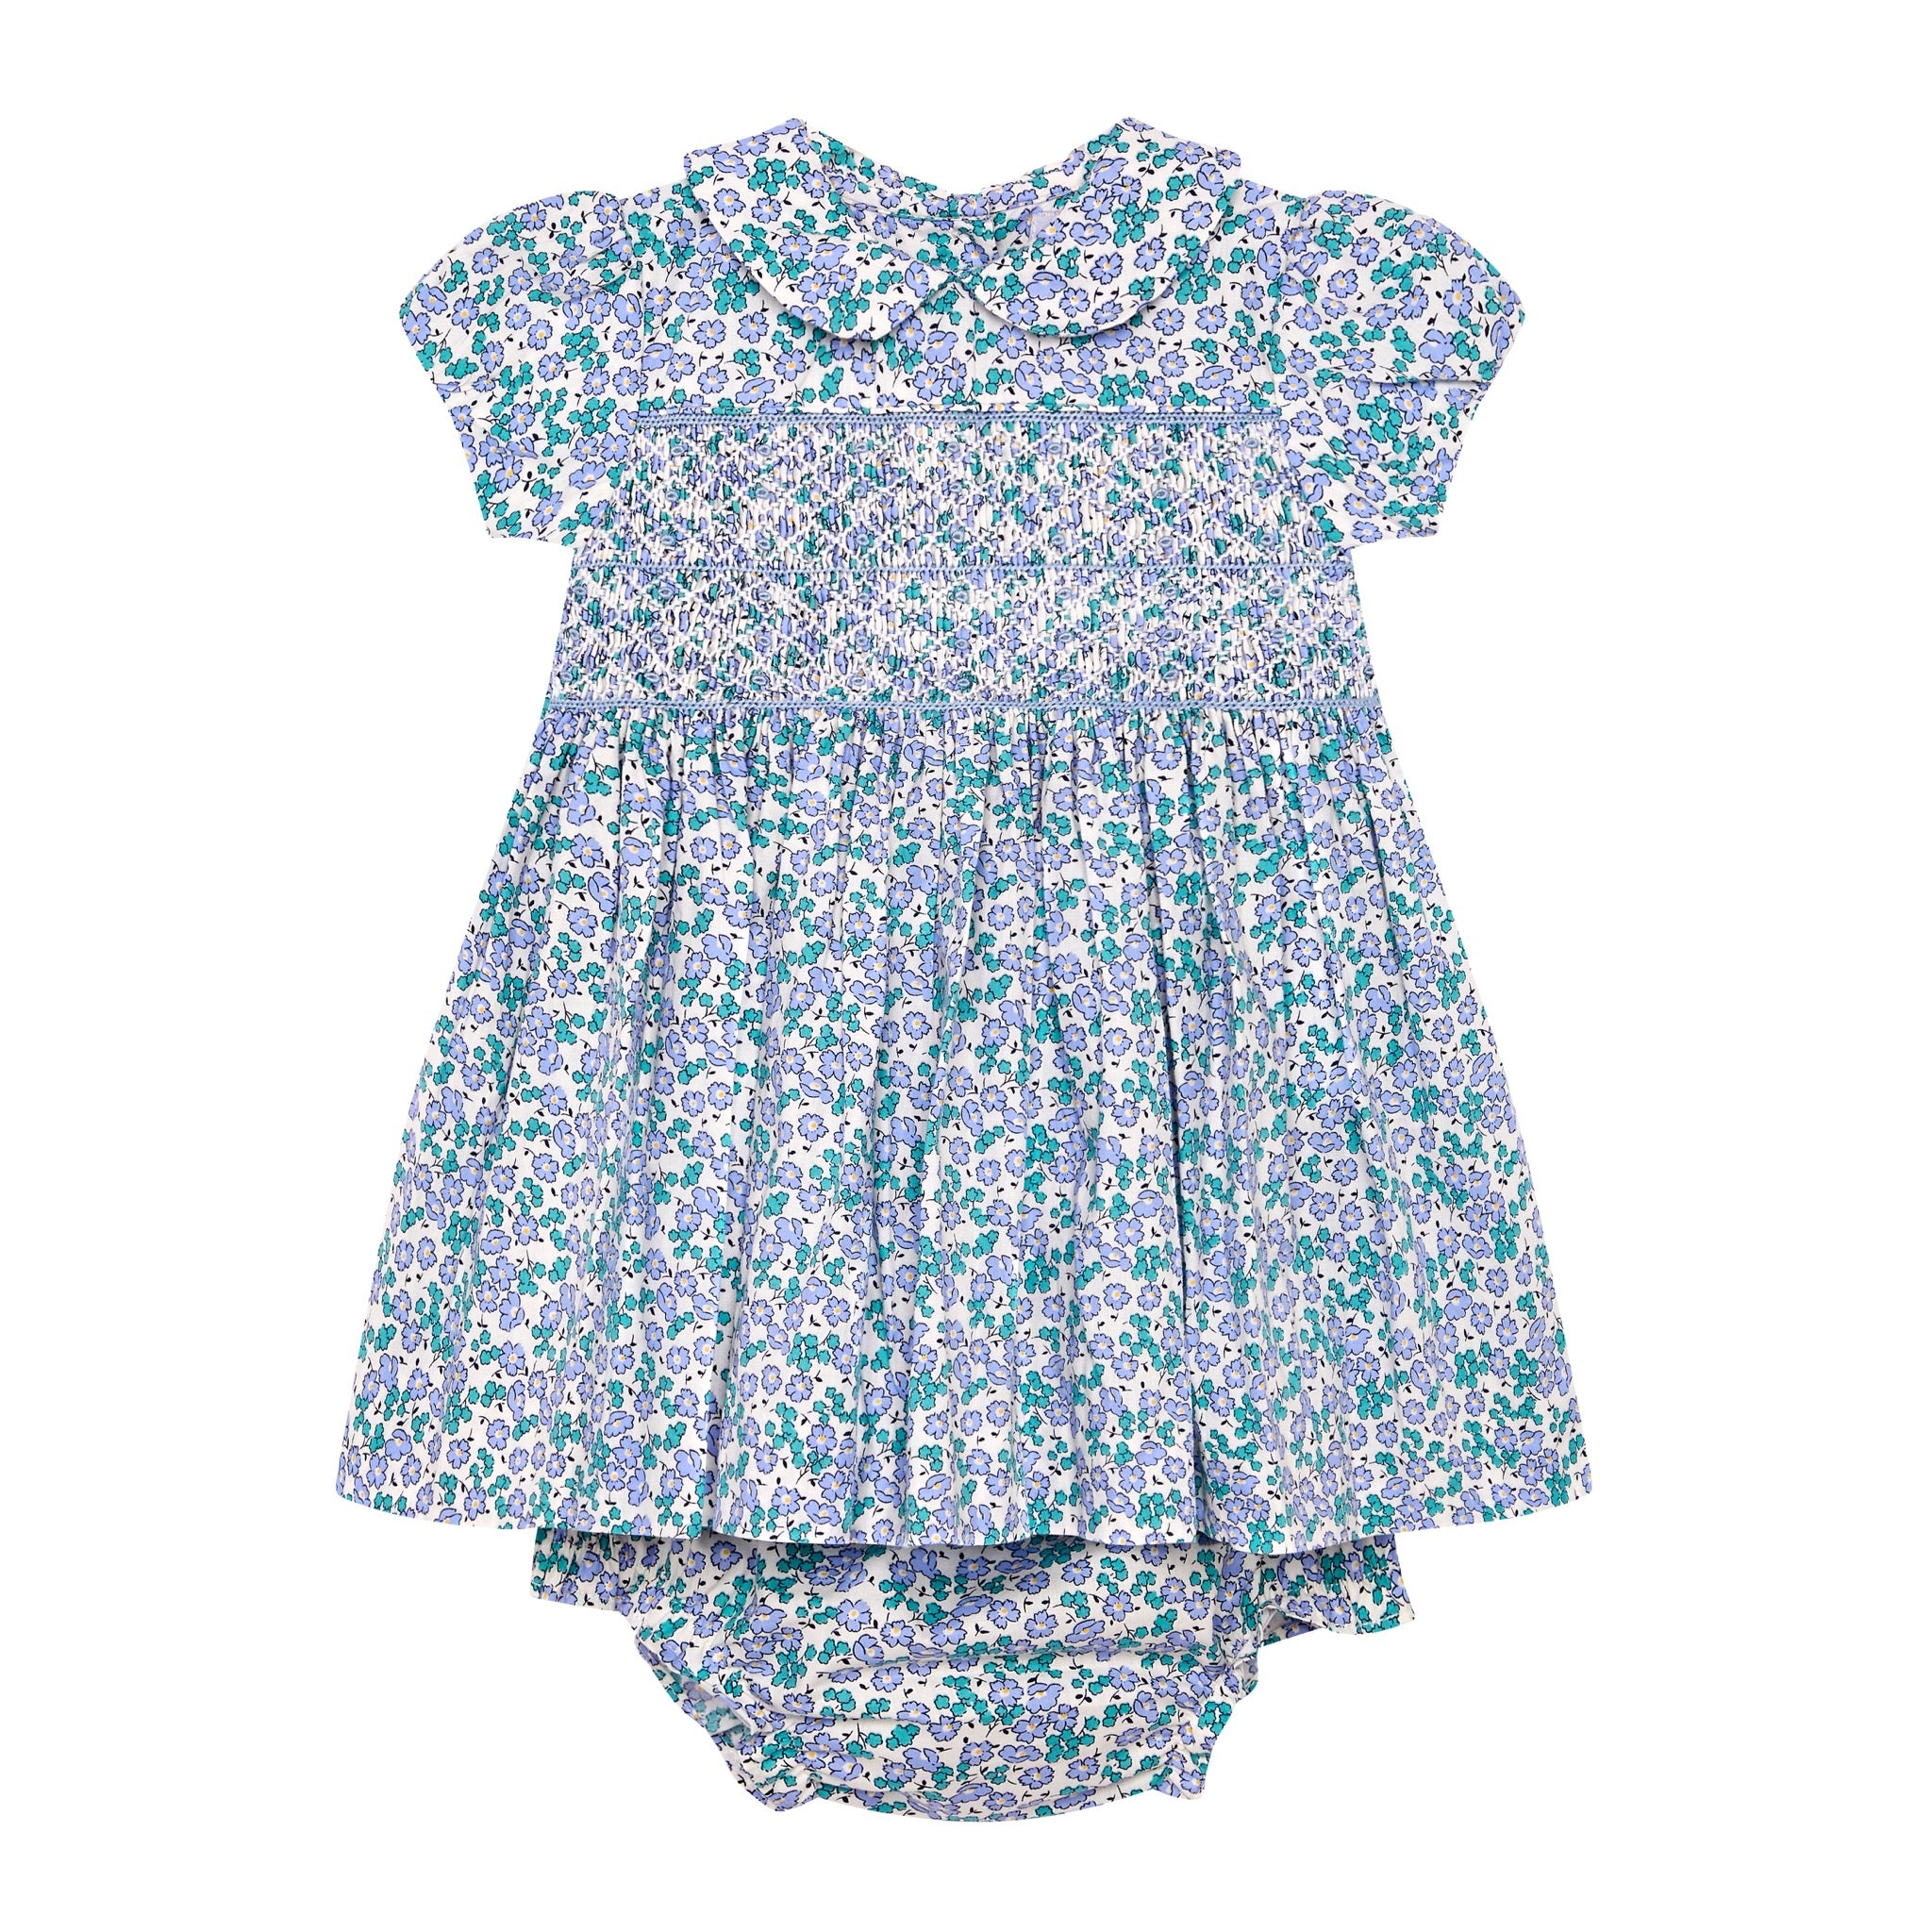  Floral dress with bloomers, hand-smocked, made from 100% cotton, front